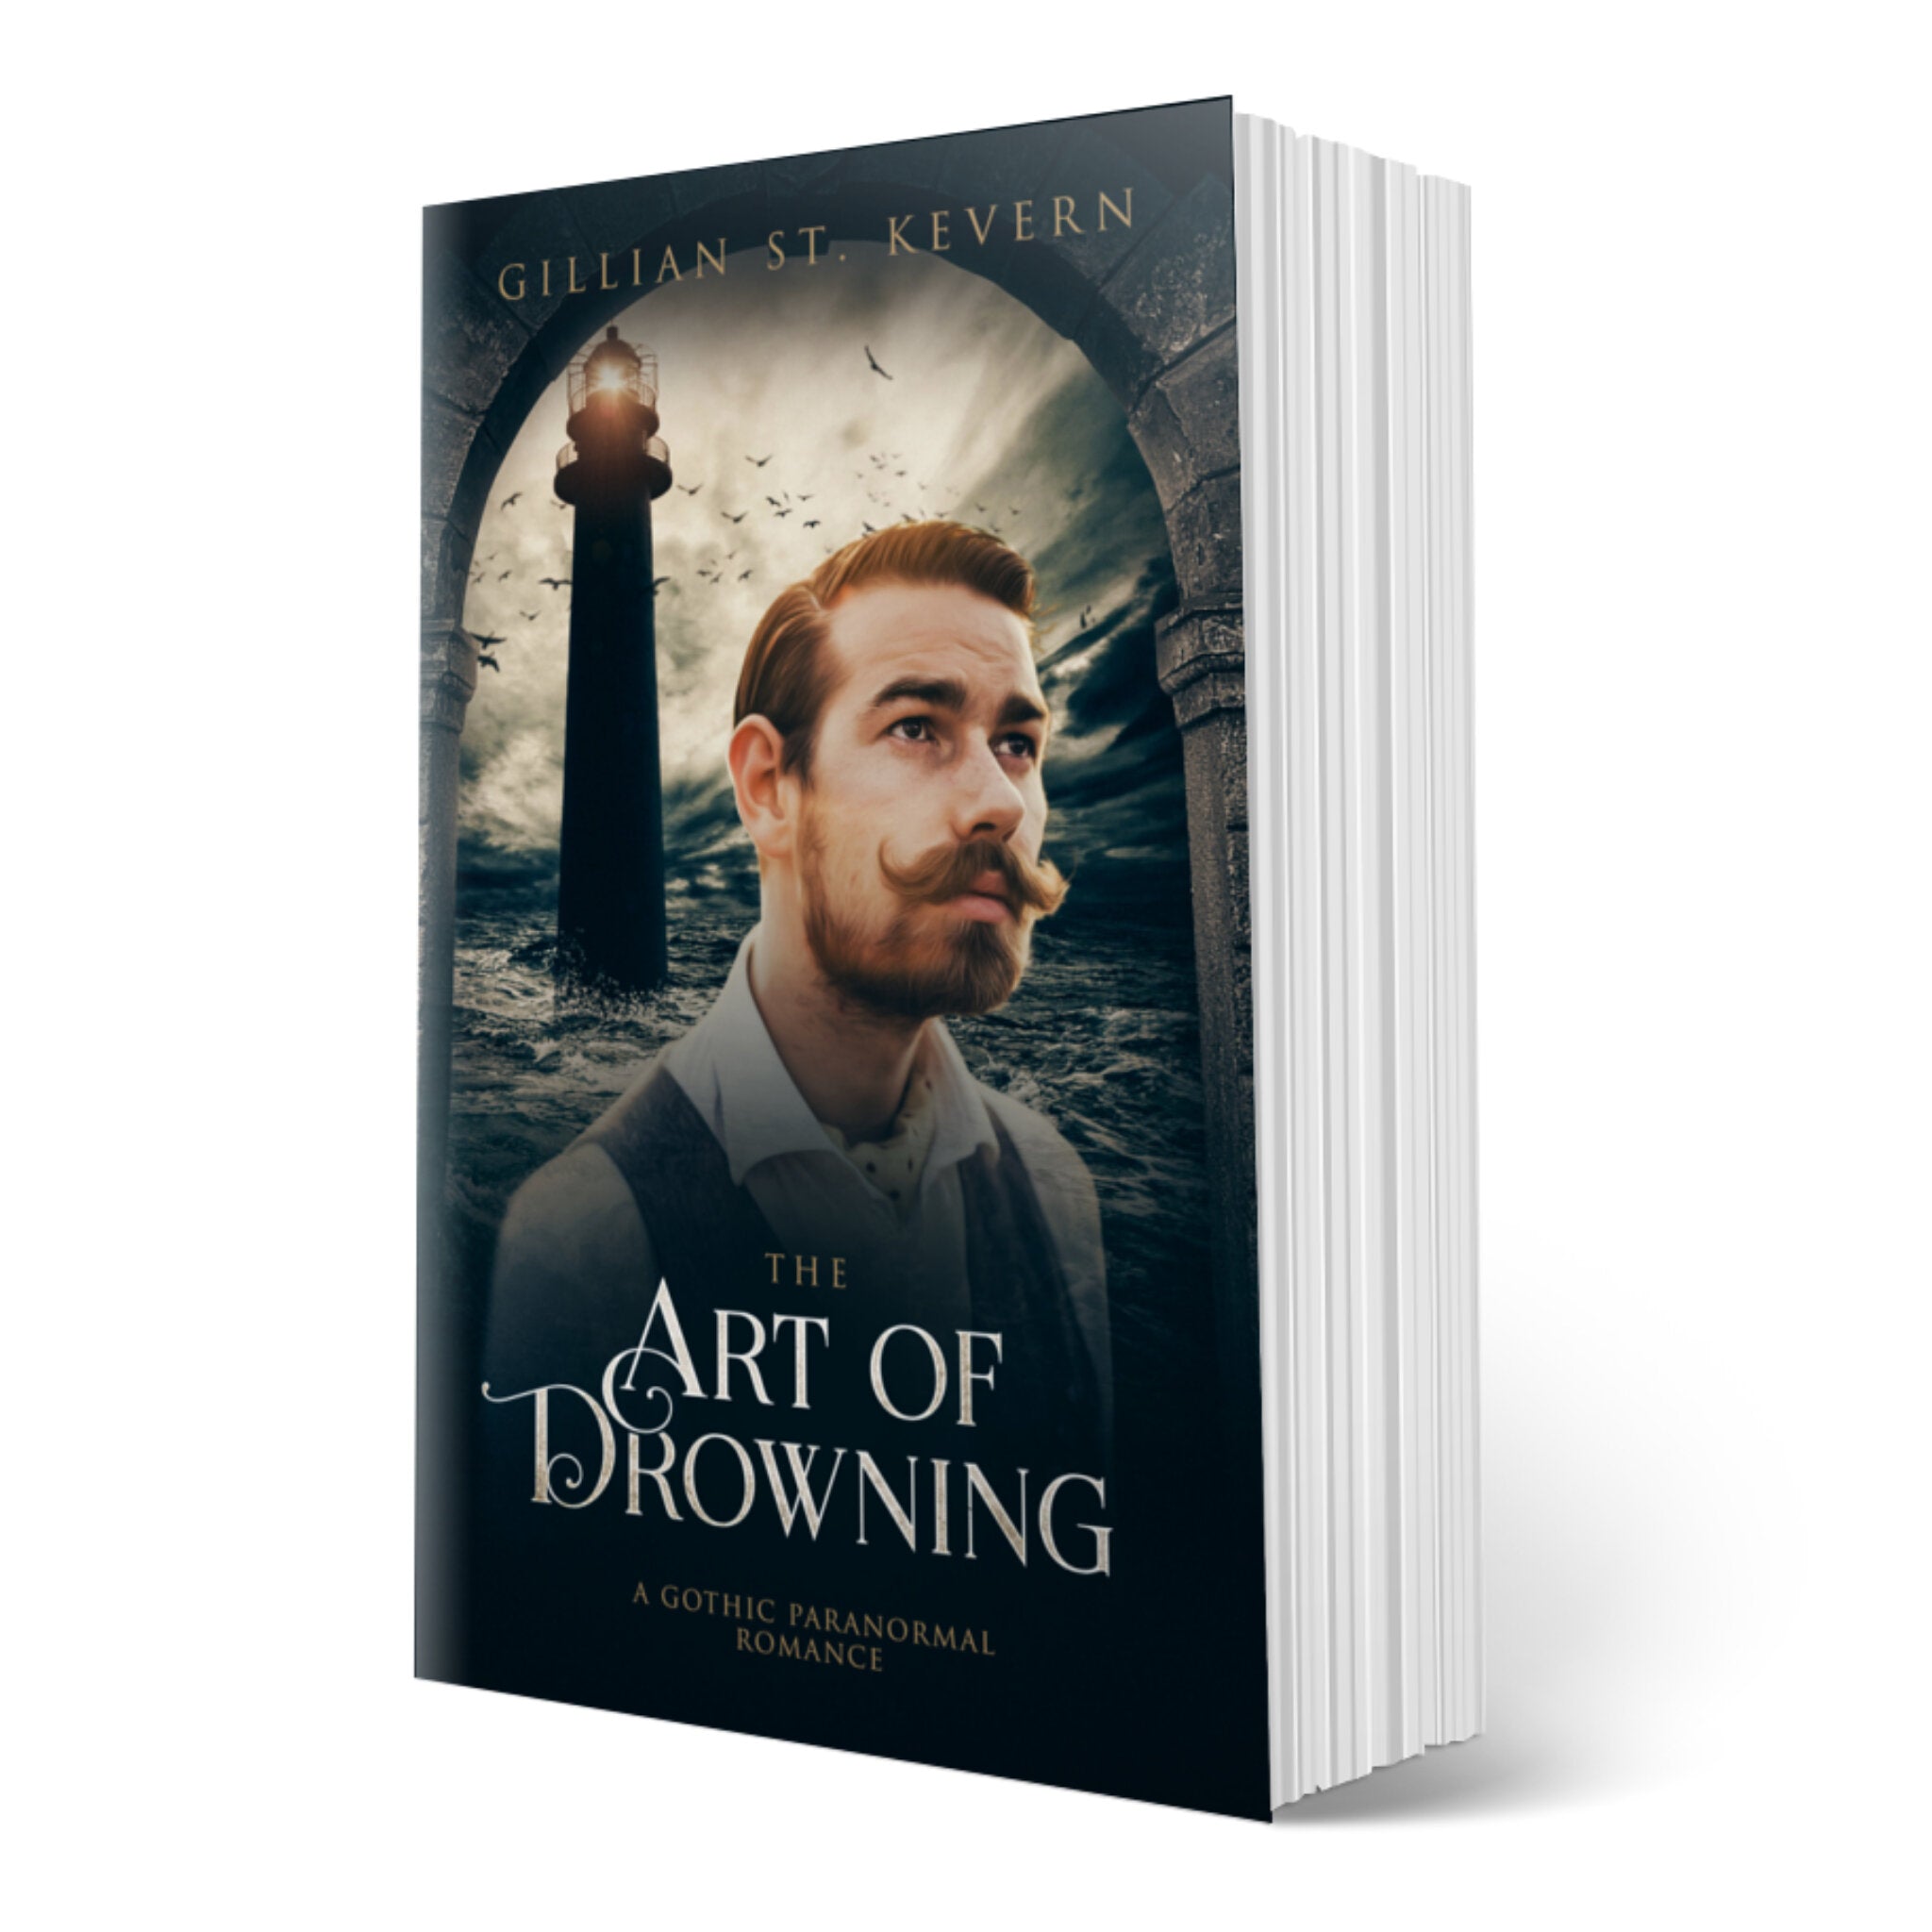 The Art of Drowning cover, a gay gothic romance with supernatural elements. A brown haired man with a very impressive moustache stares beyond the viewer, expression haunted. Behind him, a lighthouse looms out of a stormy sea.